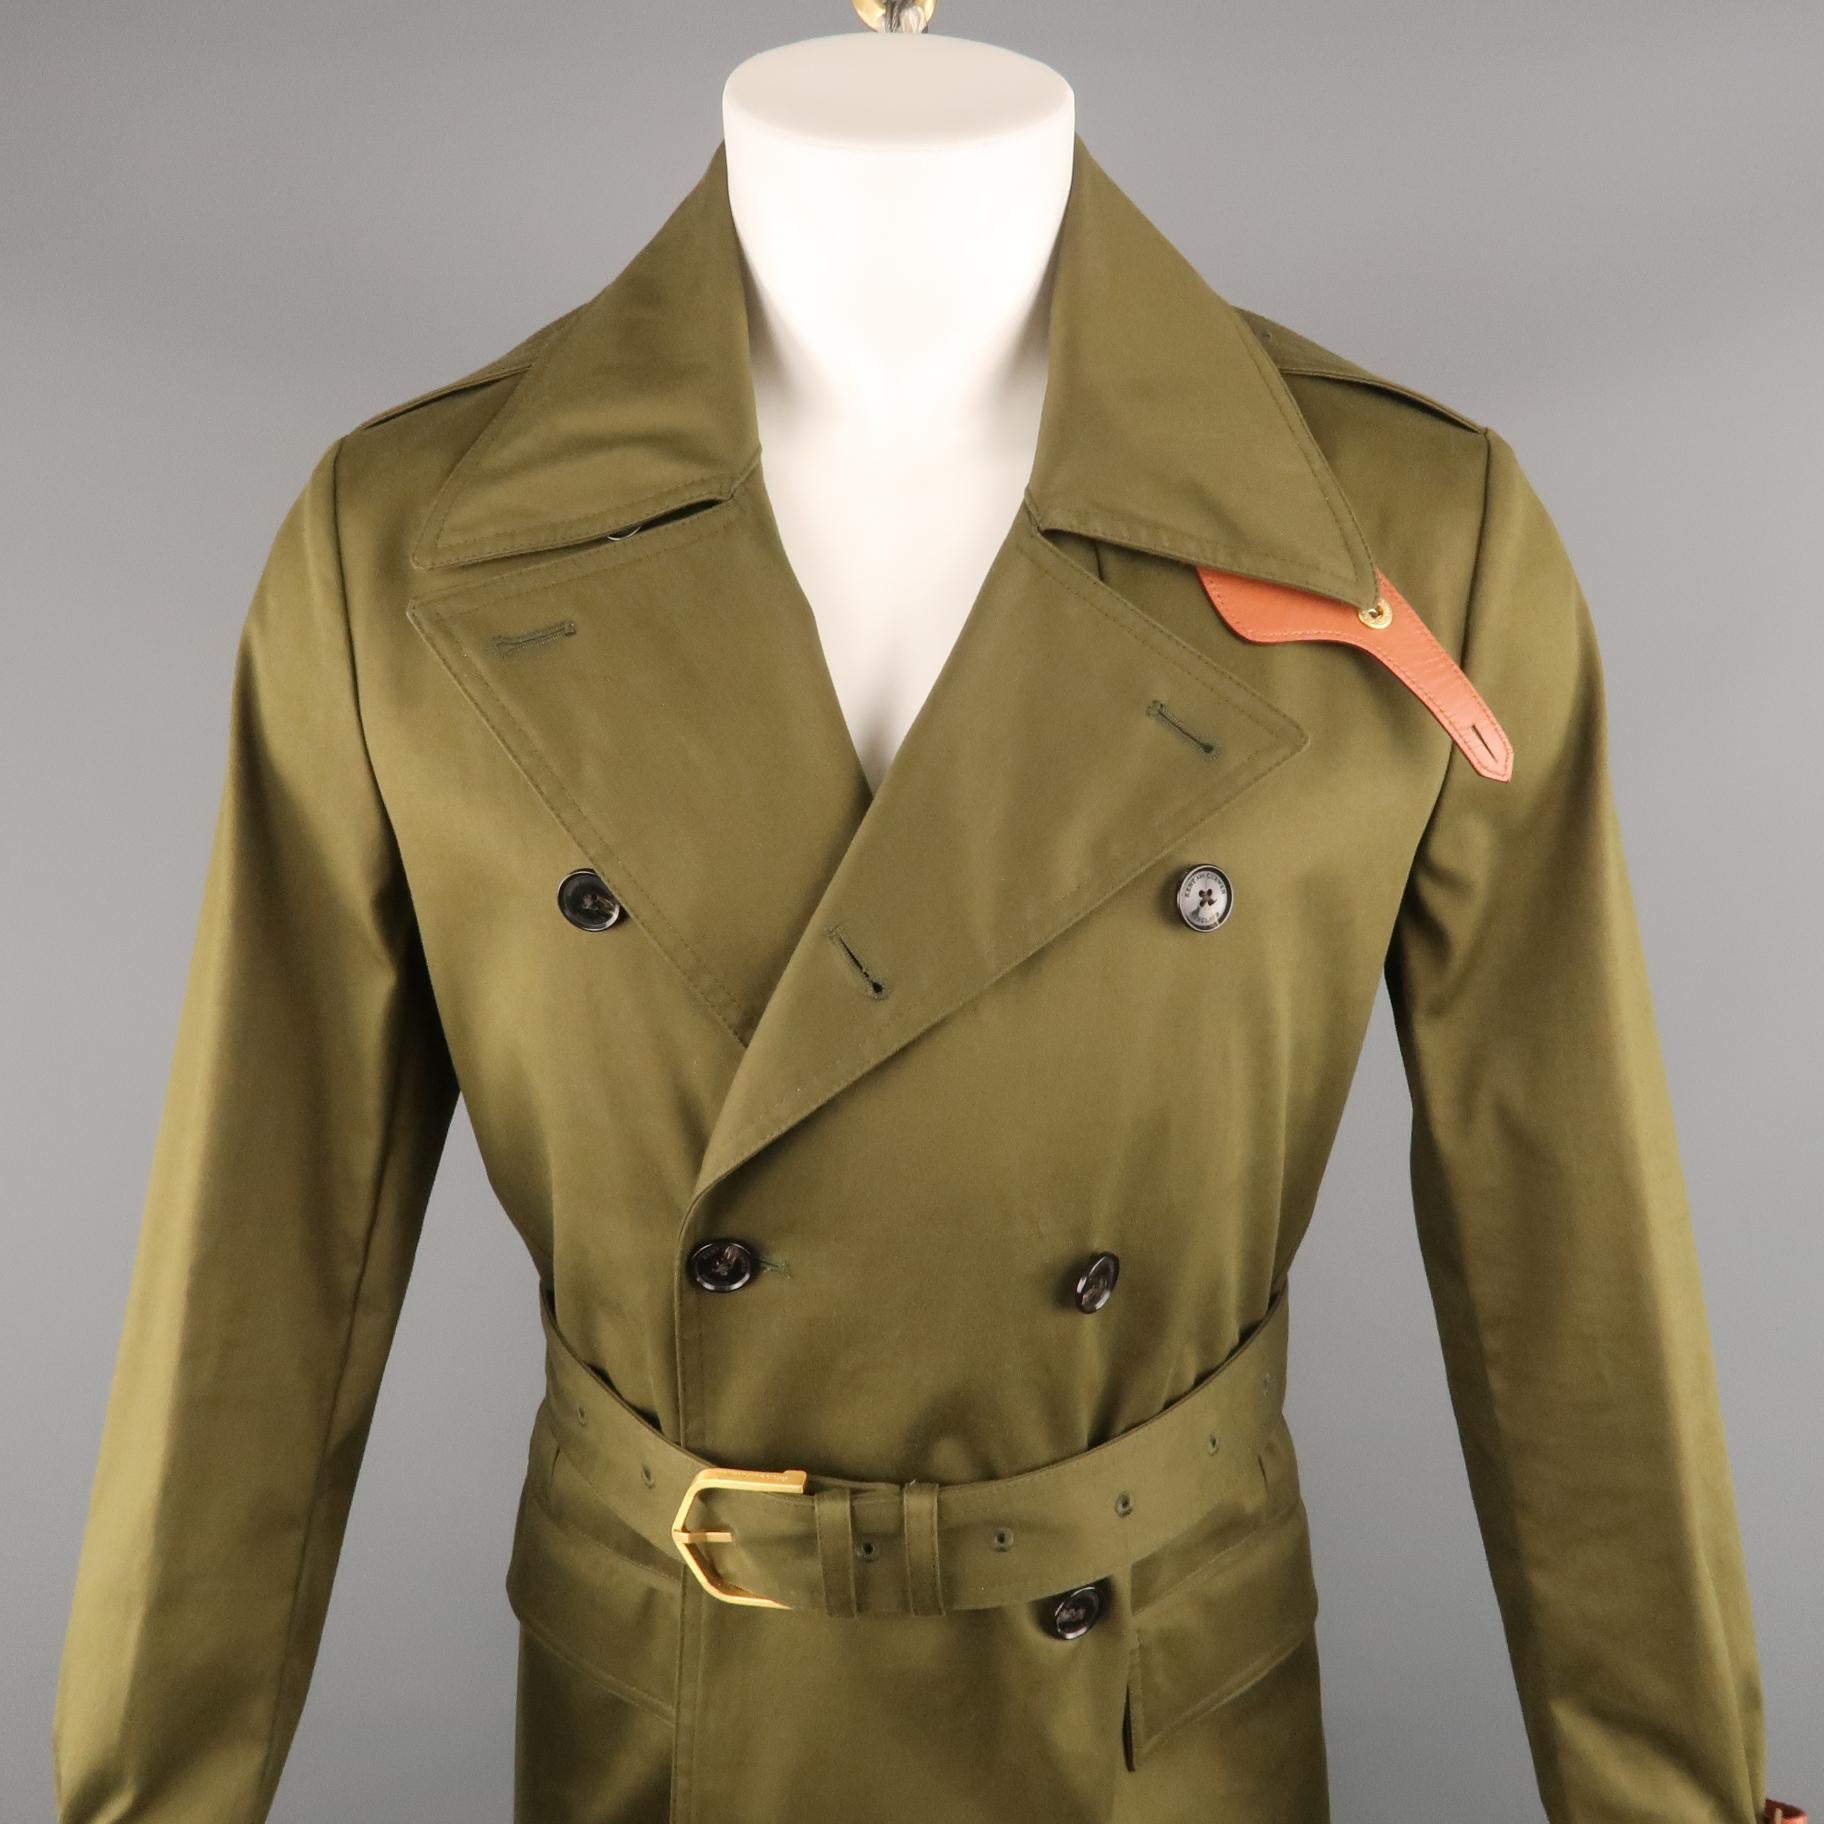 KENT CURWEN trenchcoat comes in a olive cotton featuring a belted style with brown leather details, double breasted, notch lapel, and flap pockets.

Excellent Pre-Owned Condition.
Marked: S

Measurements:

l Shoulder: 17.5 in.
l Chest: 40 in.
l